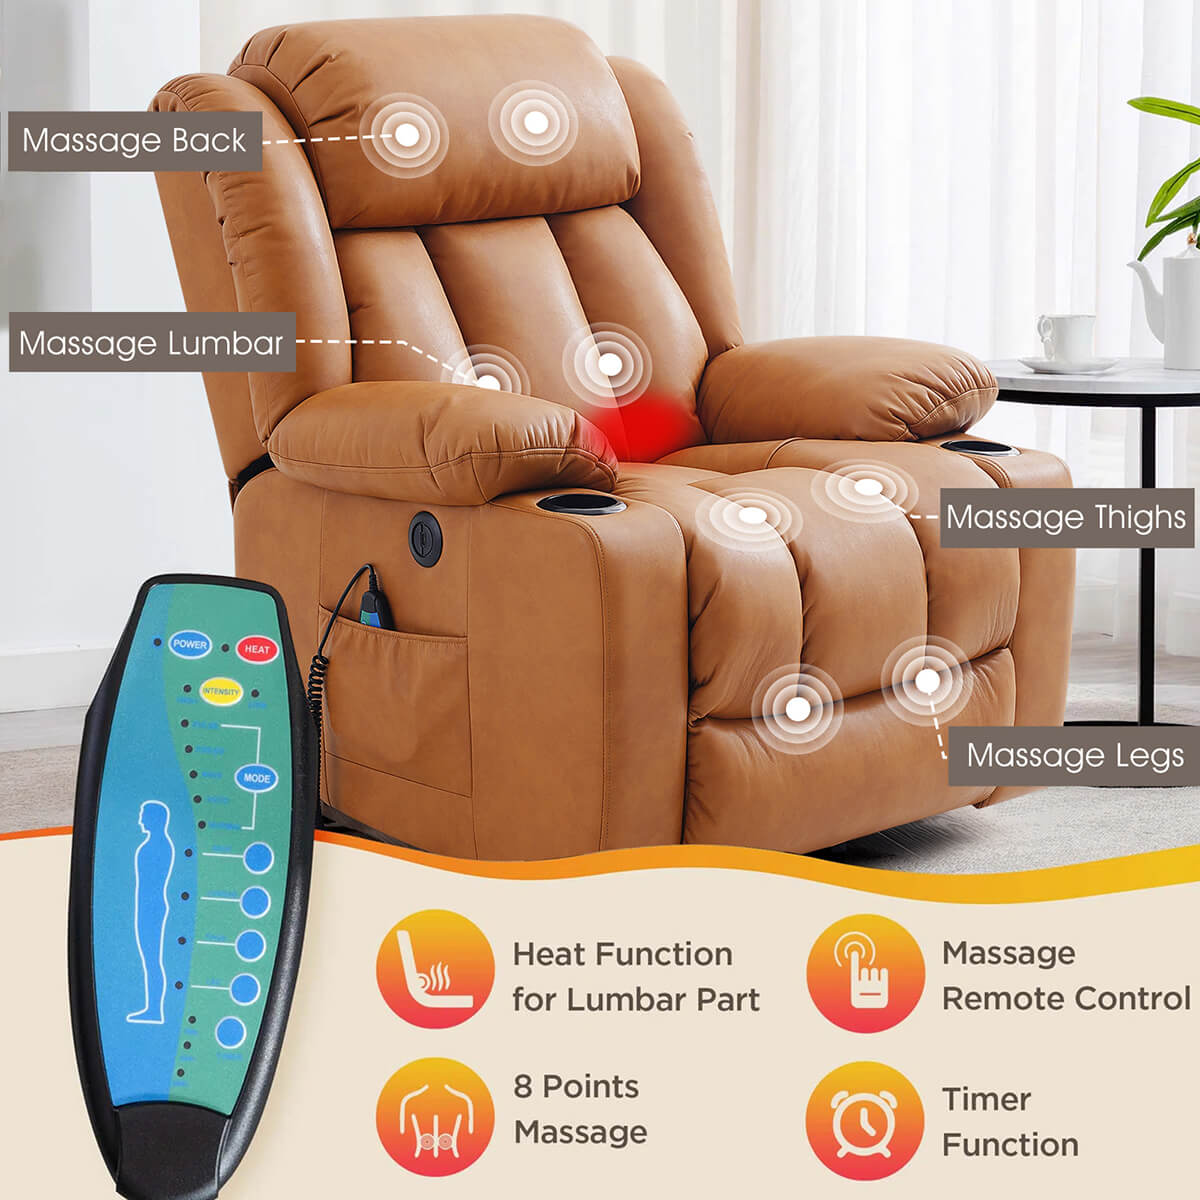 Soulout Luxury Lift Chair Recliner with Heat and Massage Orange